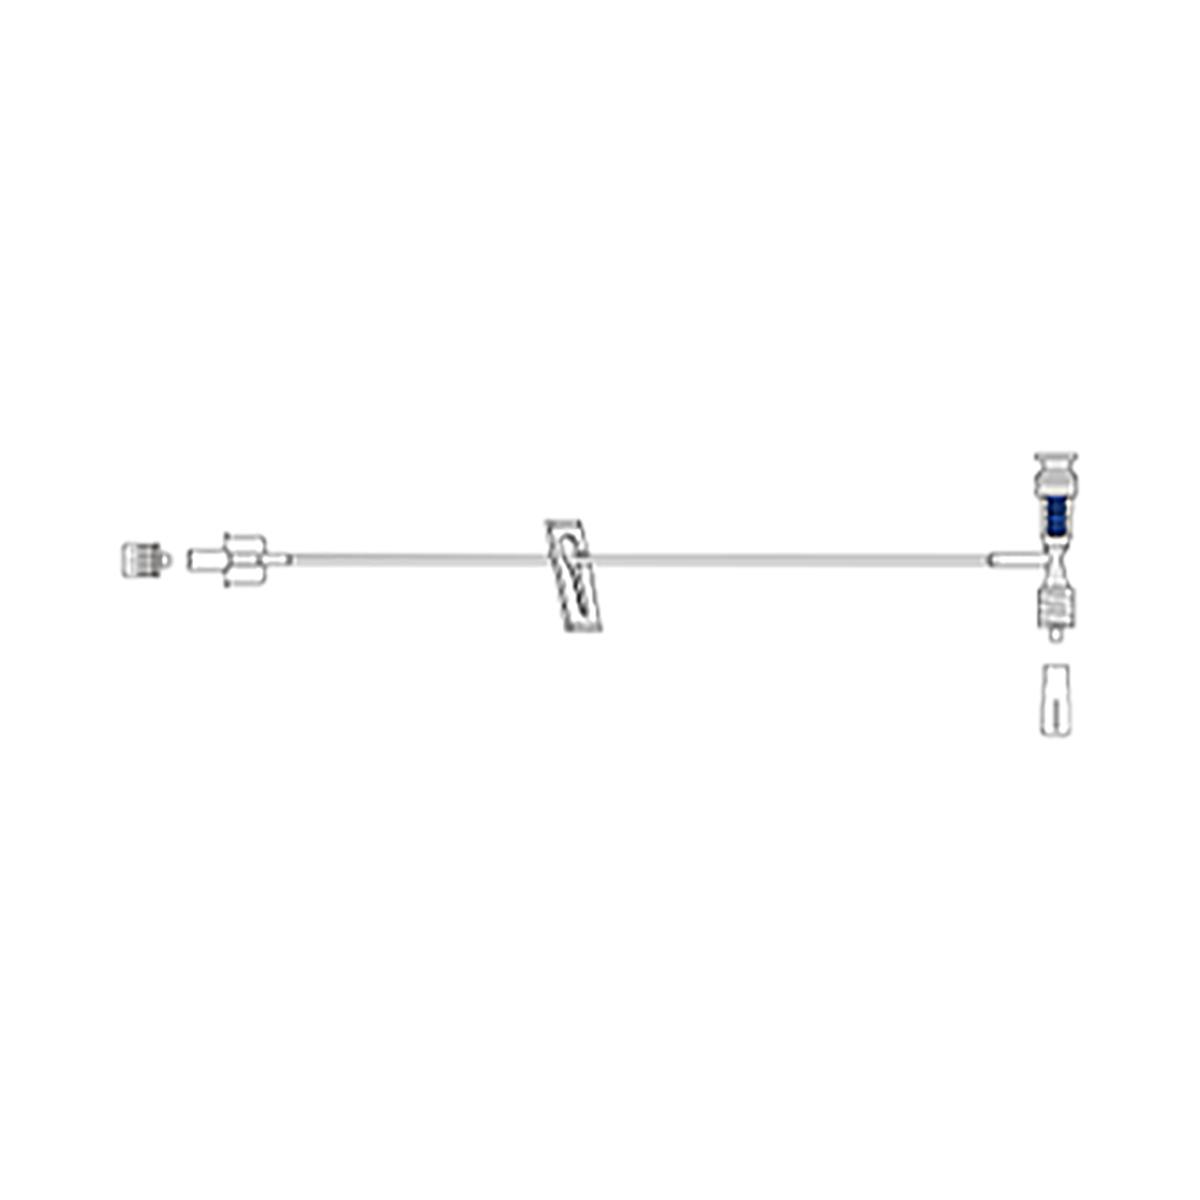 MEDLINE DYNDTN2006 30 IV Extension Set With Non-Removable Slide Clamp,  Rotating Male Luer Lock, 4ml, 76cm (X)